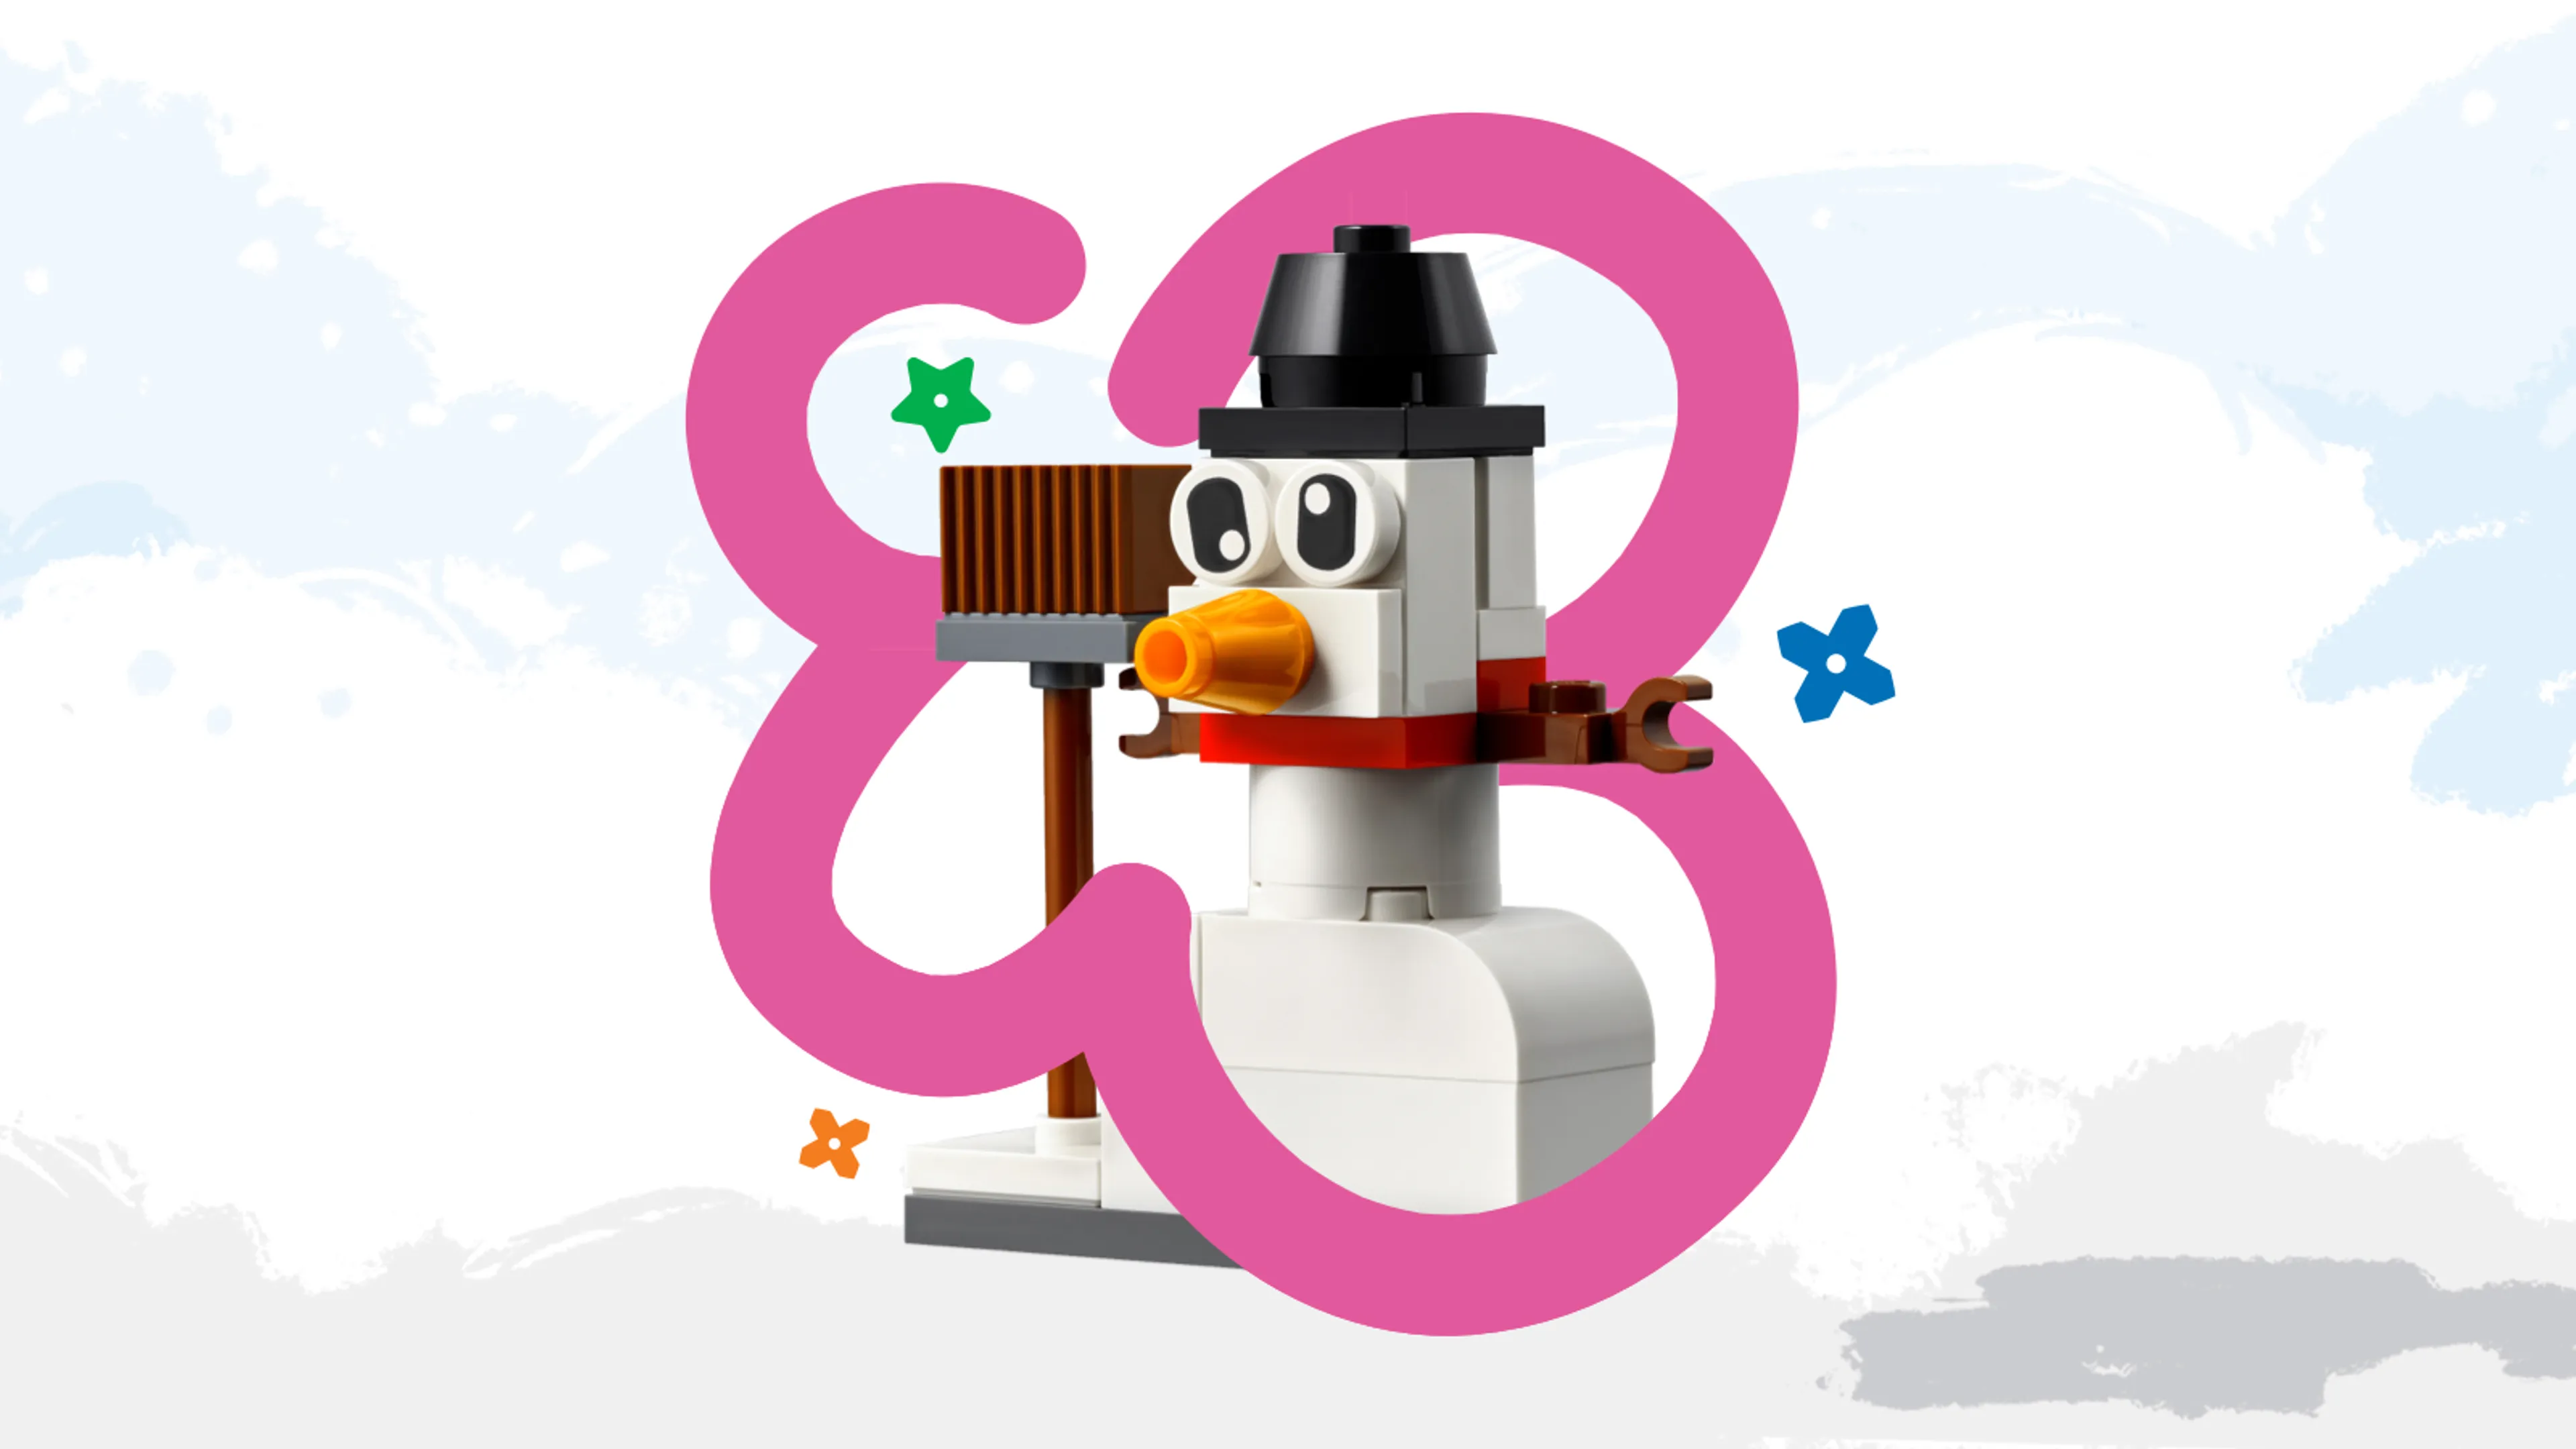 A snowman LEGO build without buttons